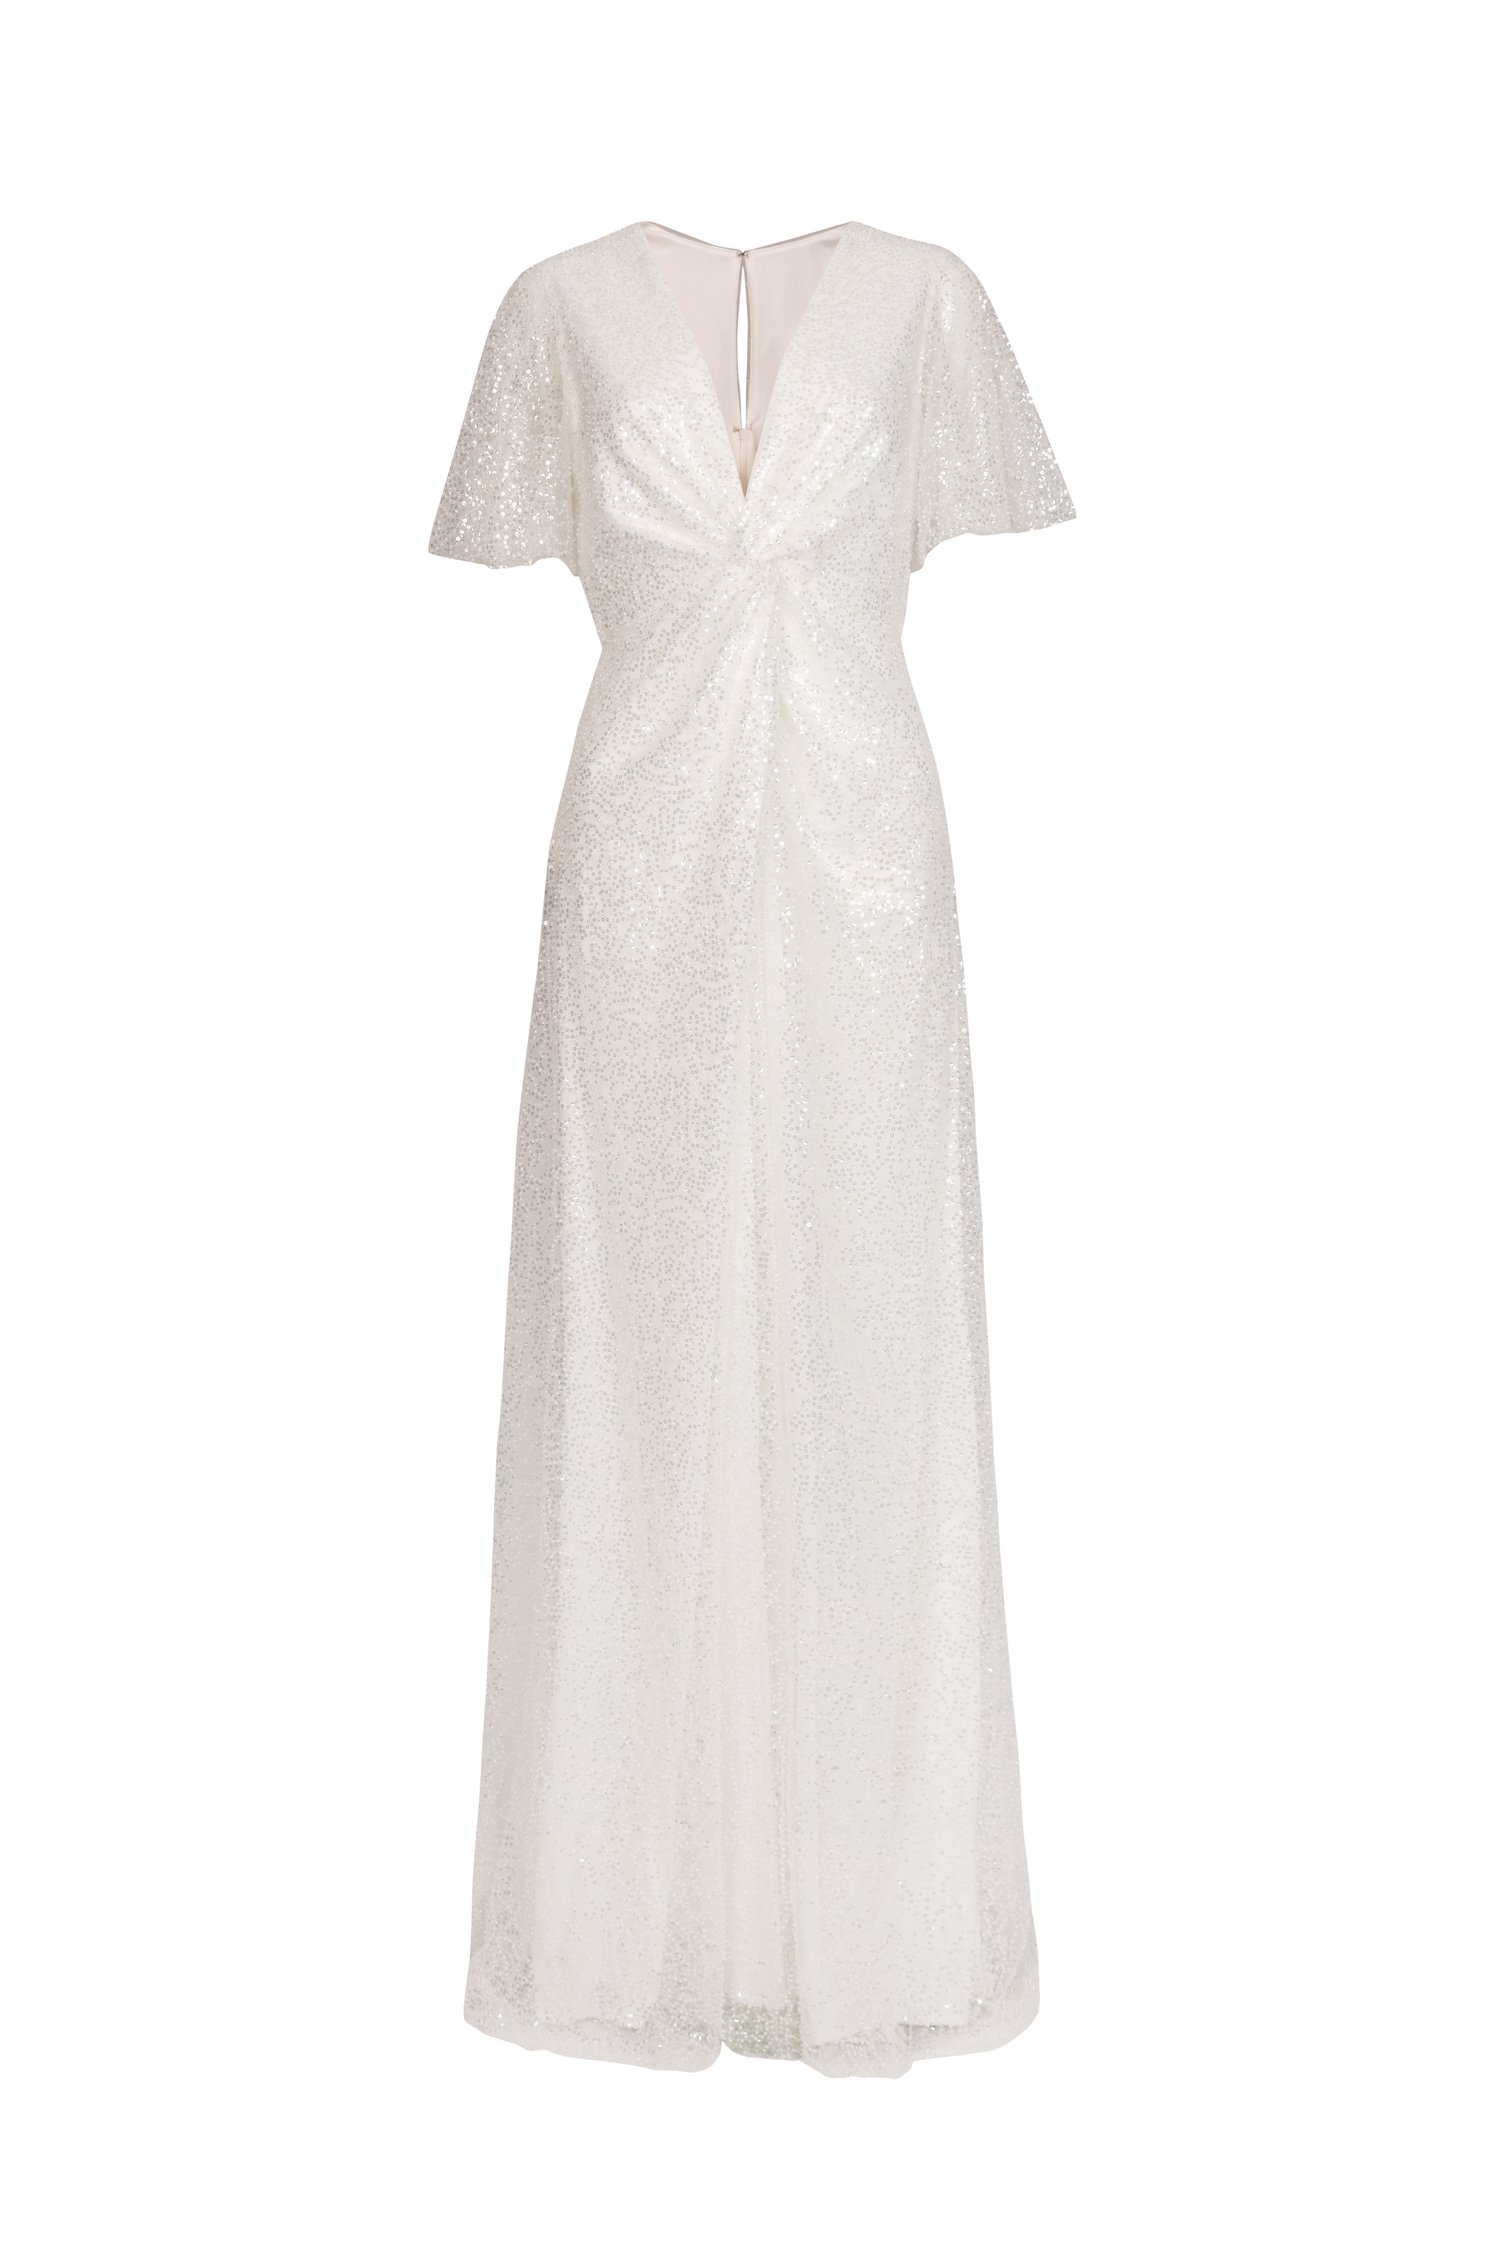 TH&TH Camilla Crystal Beaded Ivory Wedding Dress With Angel Sleeves